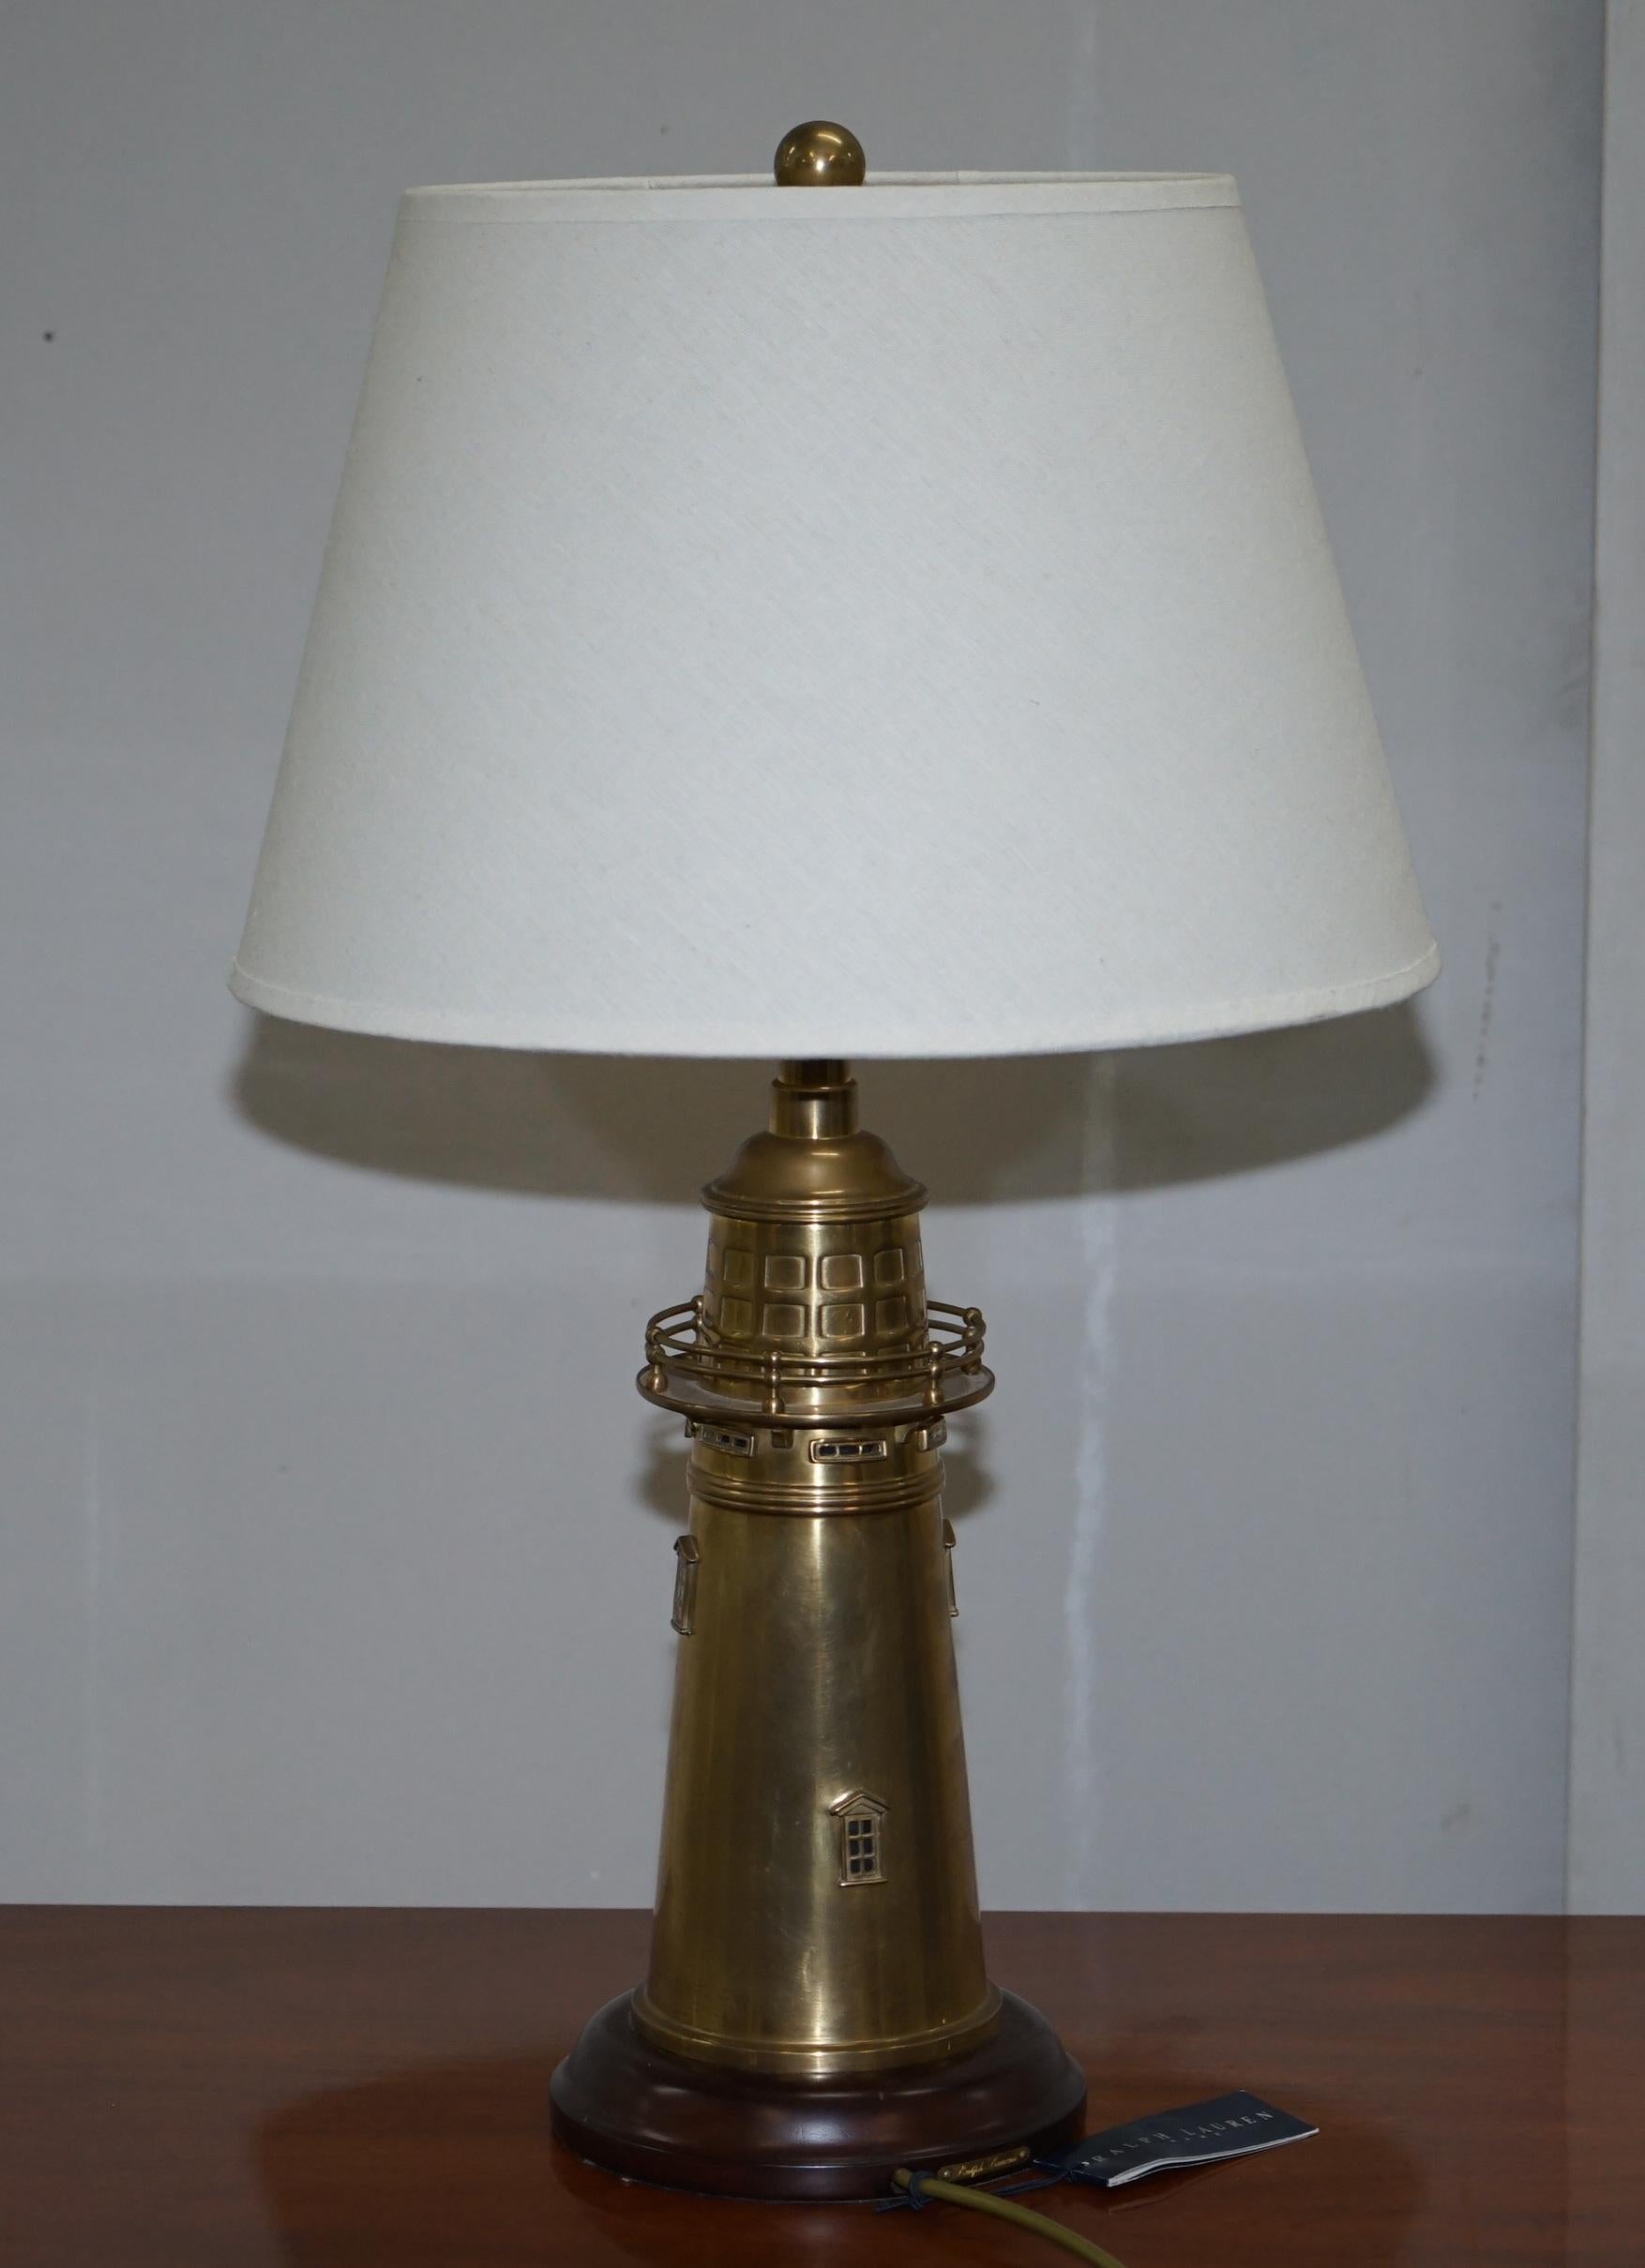 Rare Pair of Limited Edition Ralph Lauren Lighthouse Cocktail Shaker Table Lamps 1